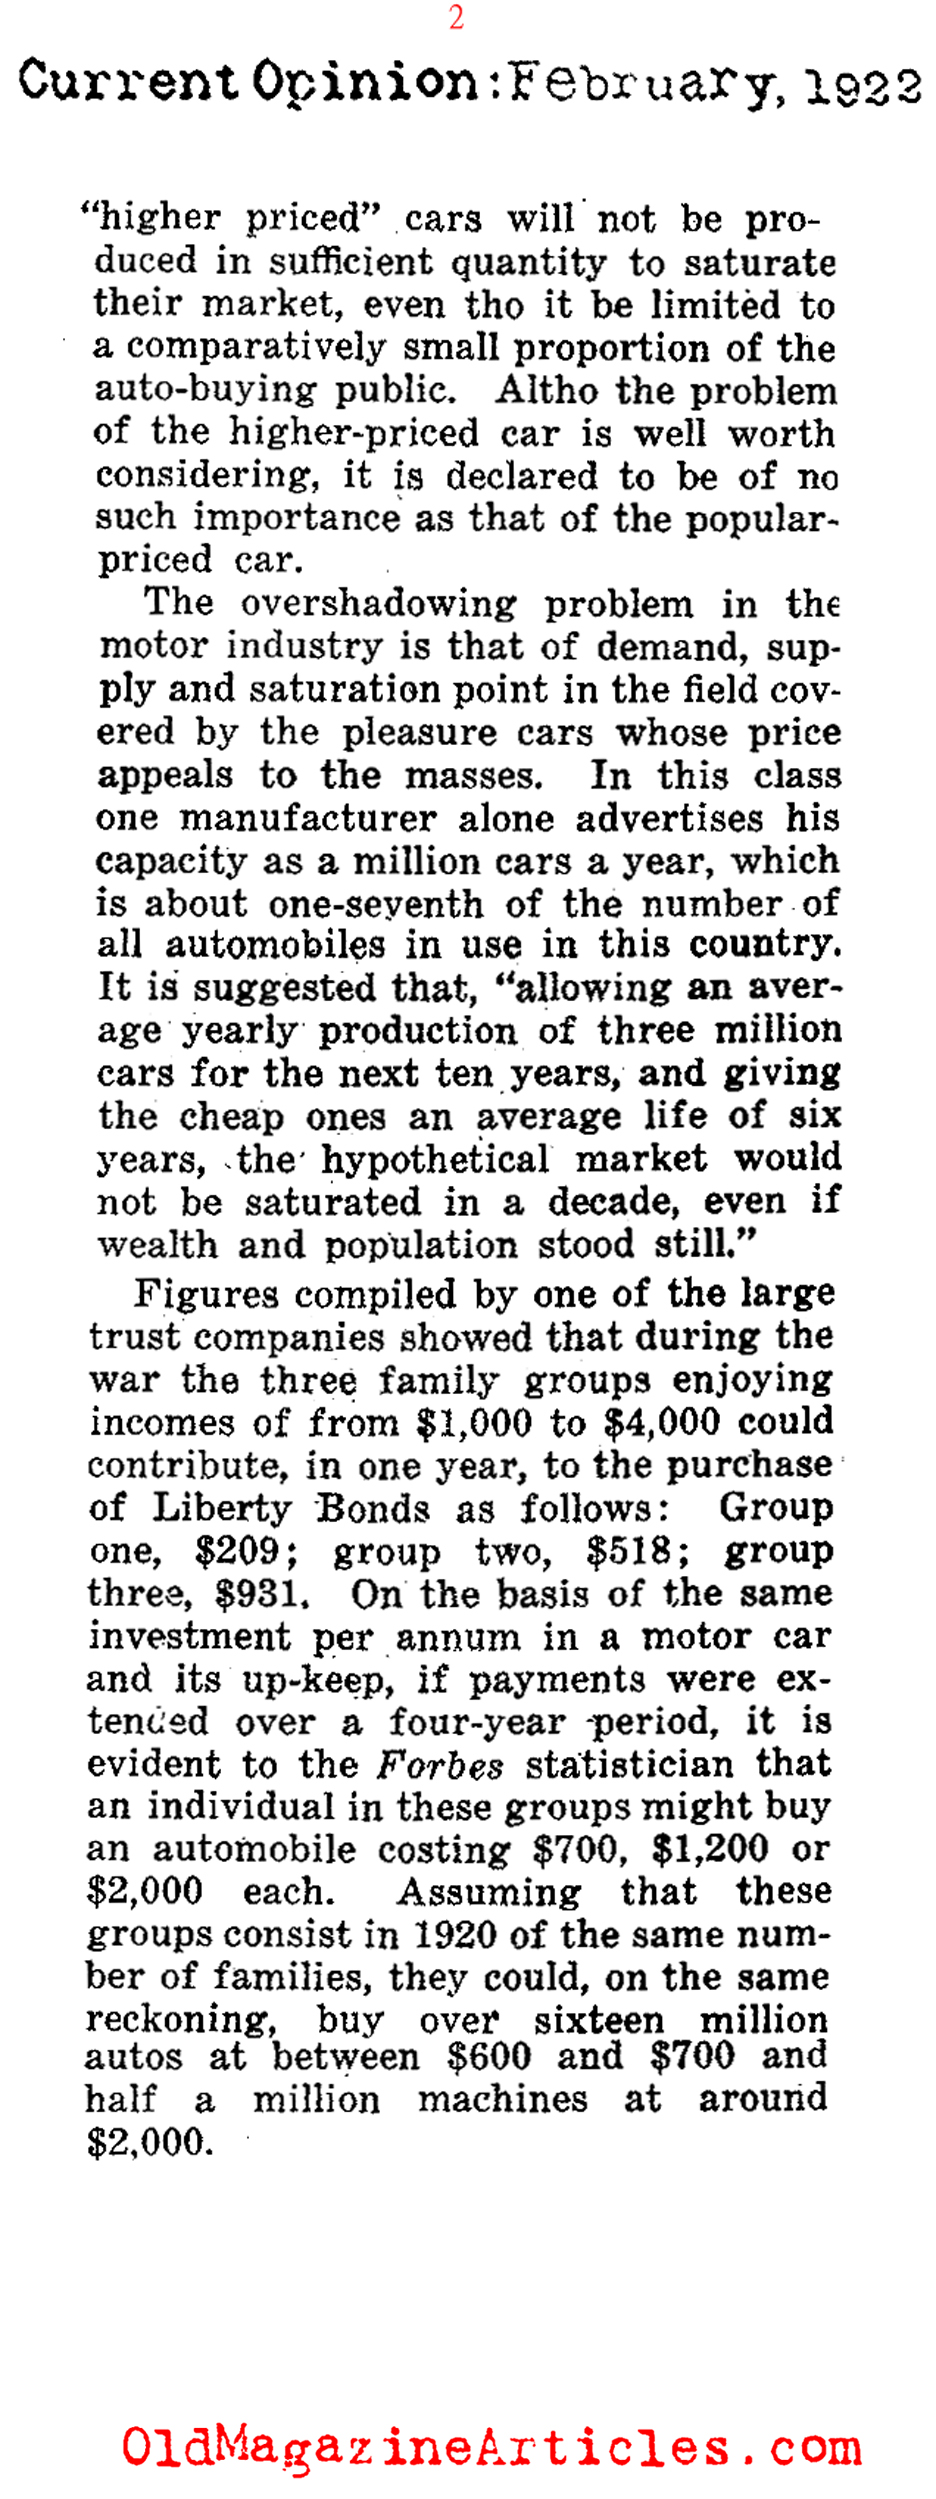 How Many Americans Had Cars in the 1920s? (Current Opinion, 1922)